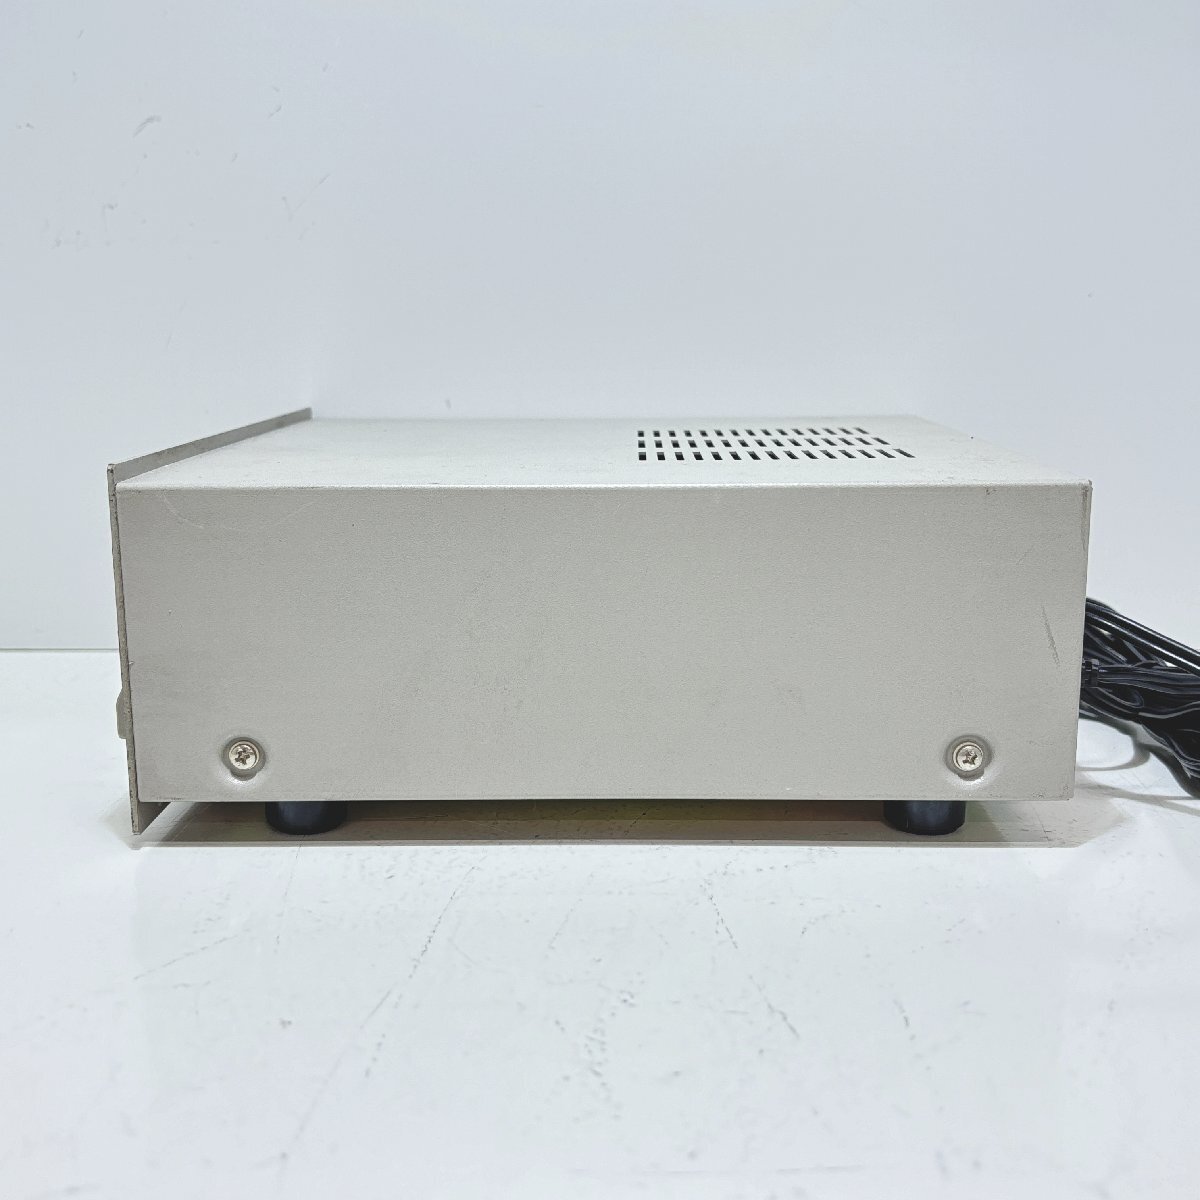 Victor power supply unit TK-A241 Victor security camera 0306183